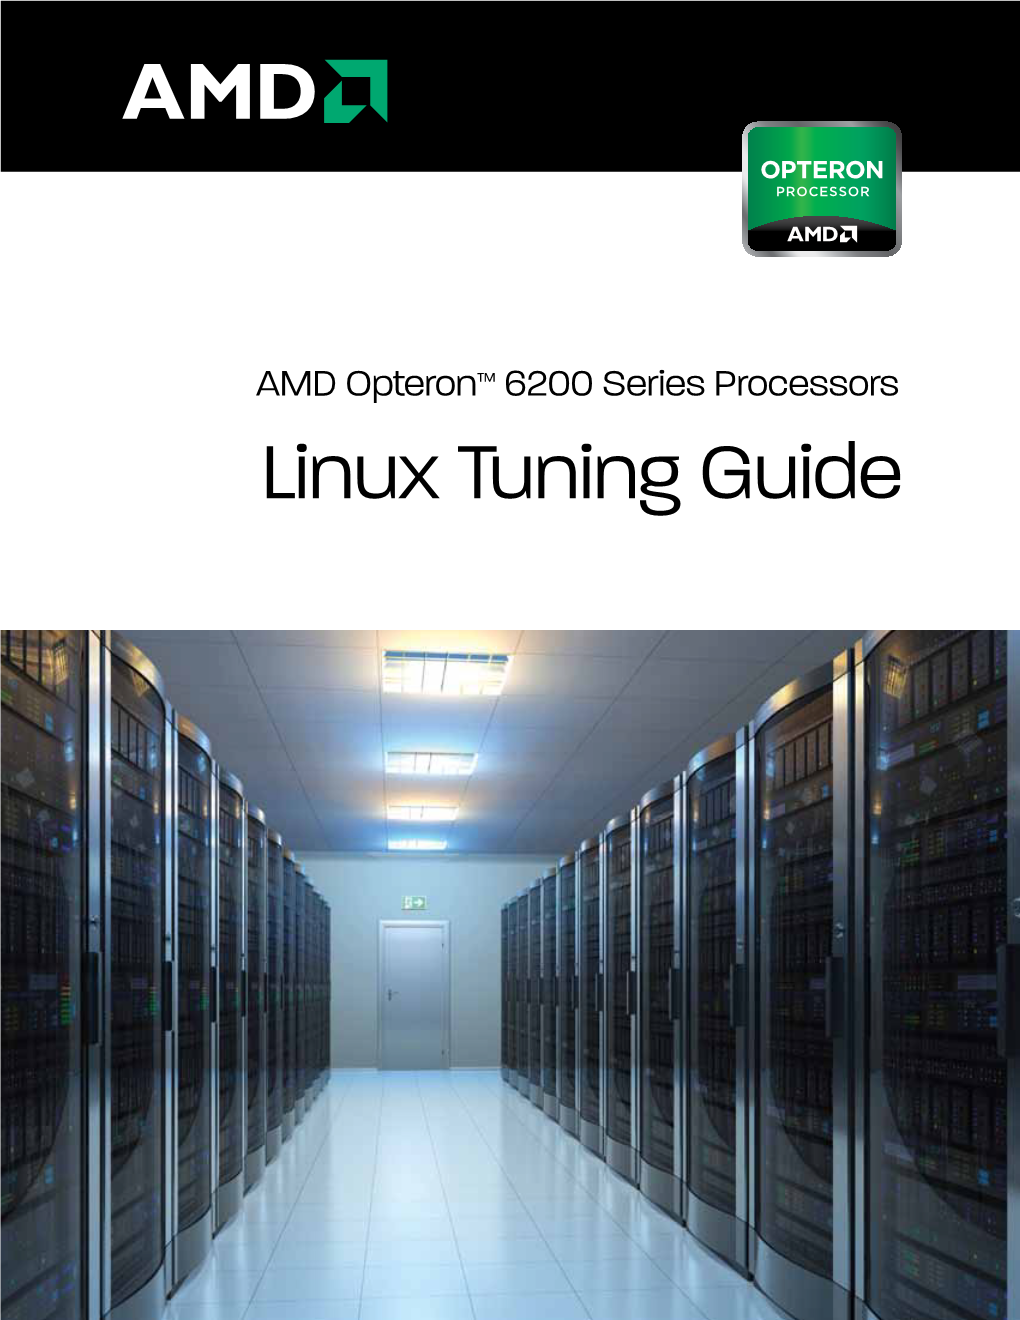 AMD Opteron™ 6200 Series Processors “Linux Tuning Guide”